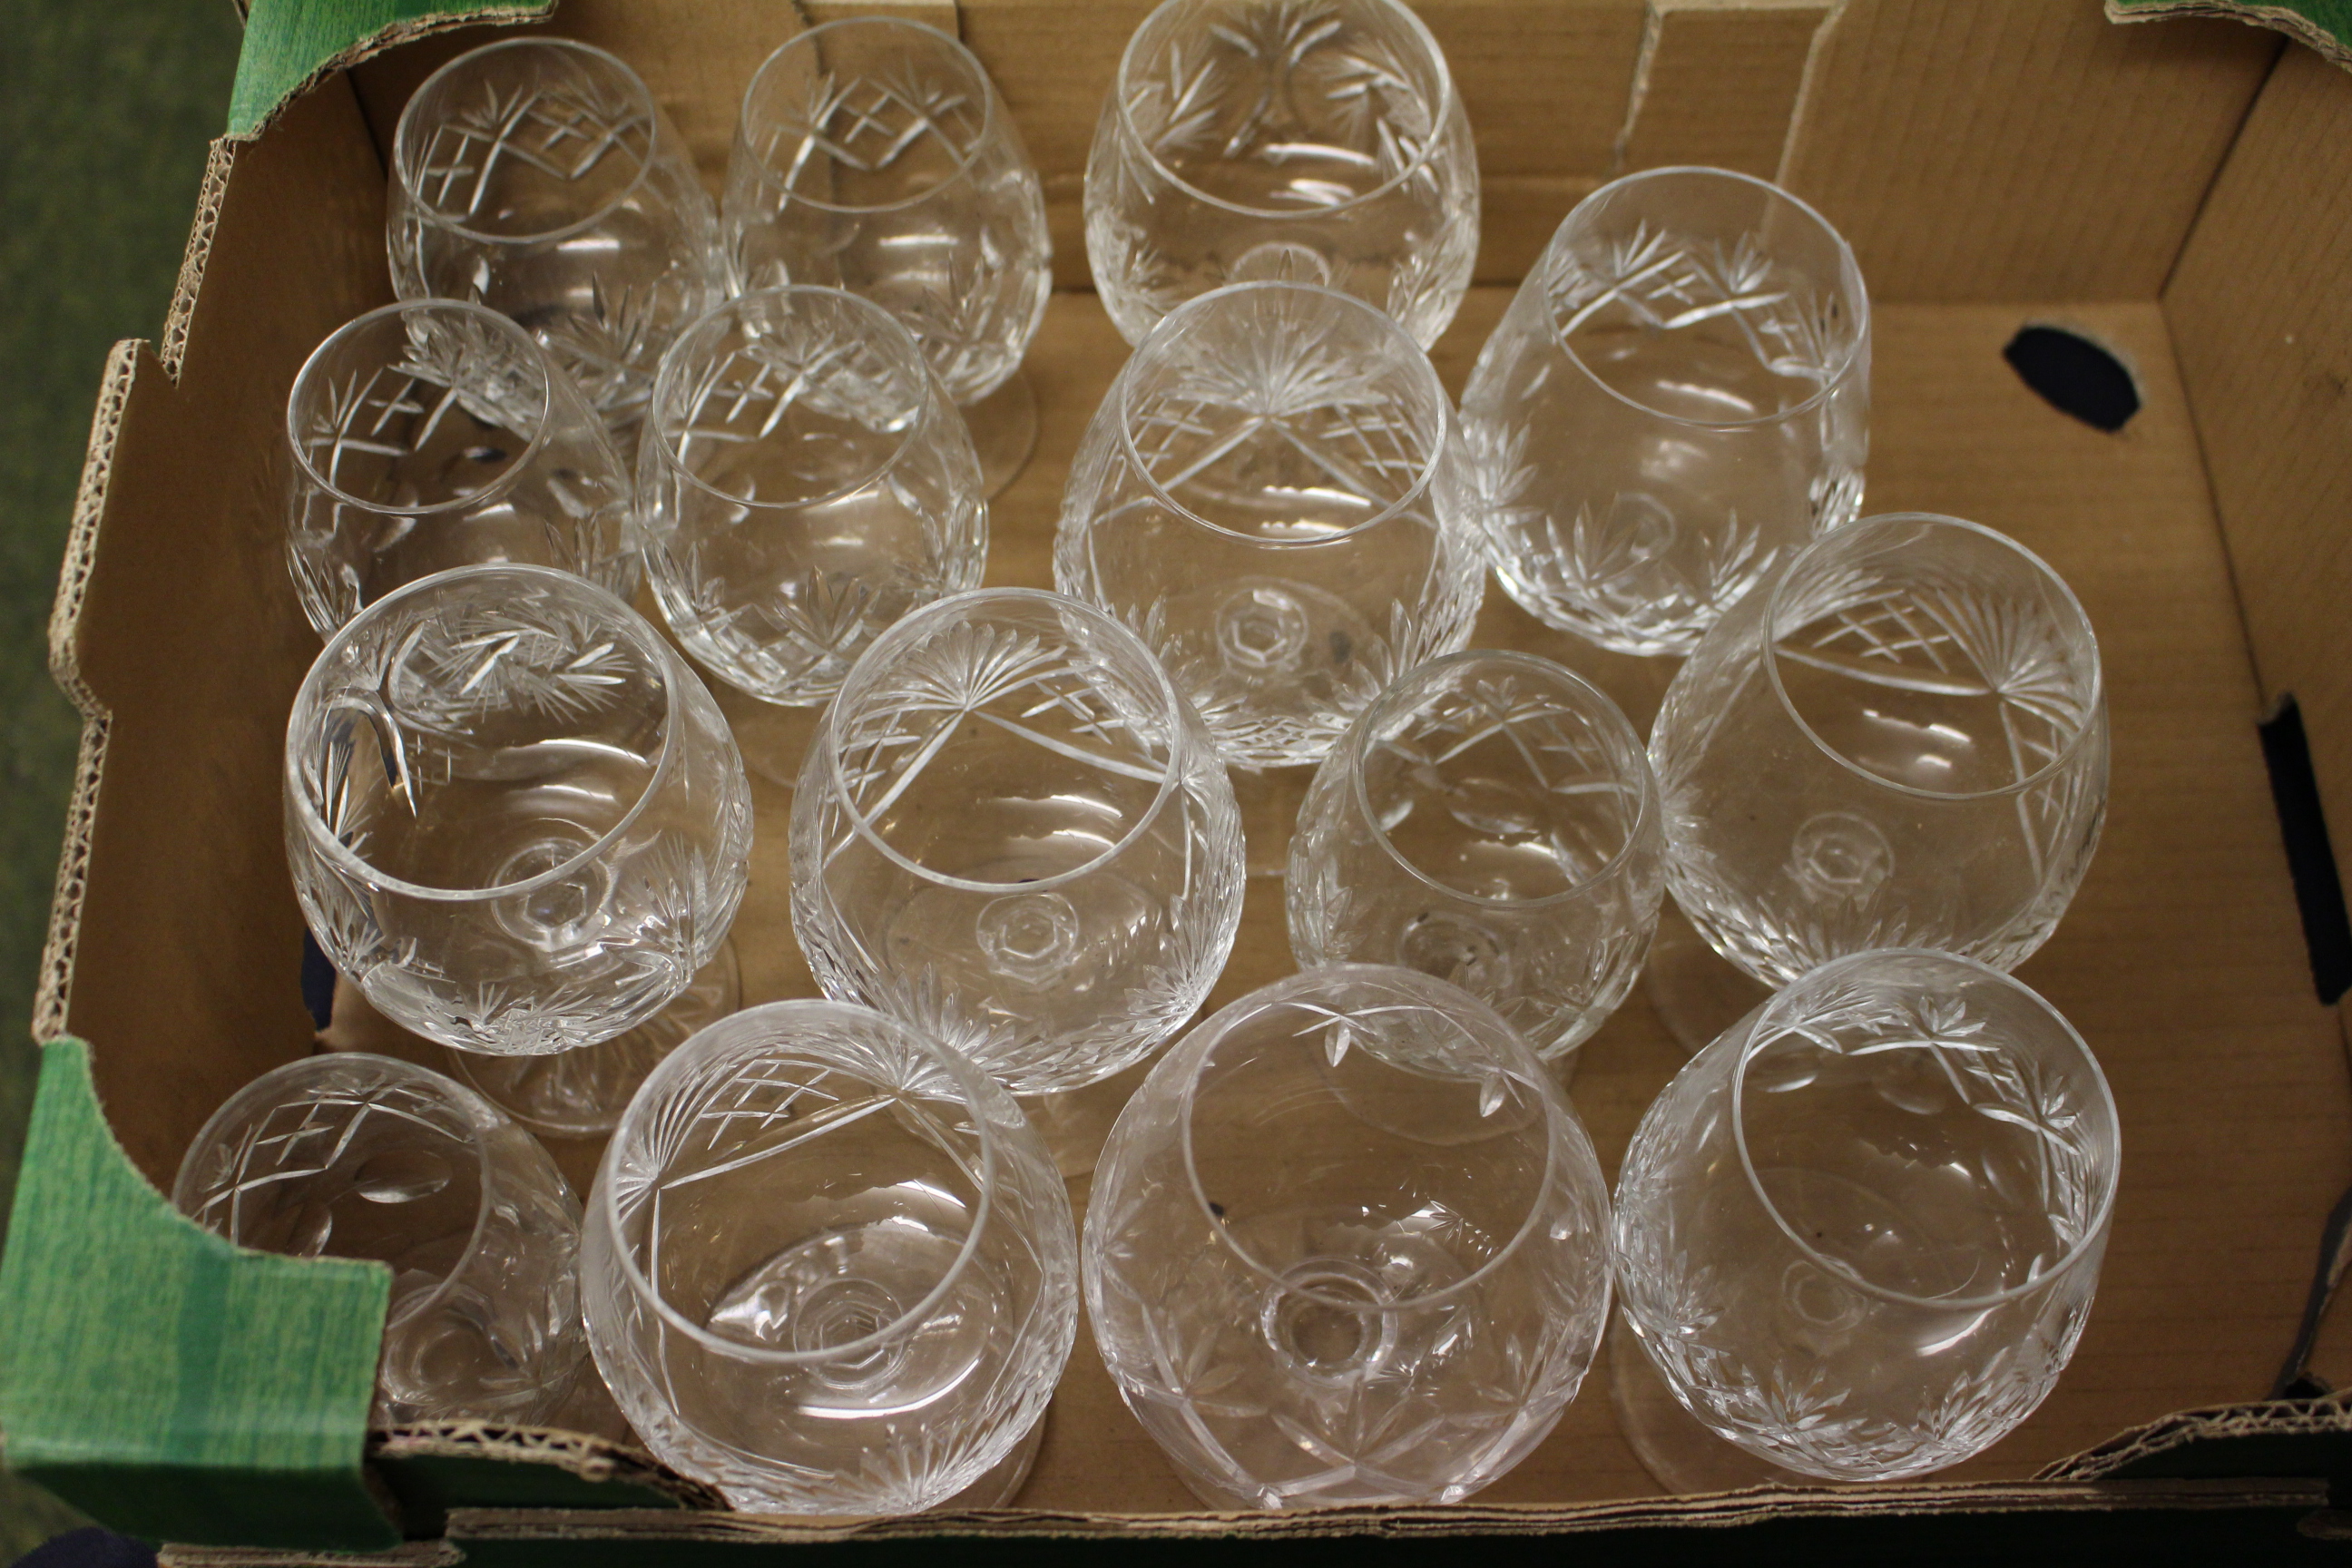 A quantity of drinking glasses to include sets of wine glasses, tumblers etc - Image 2 of 3